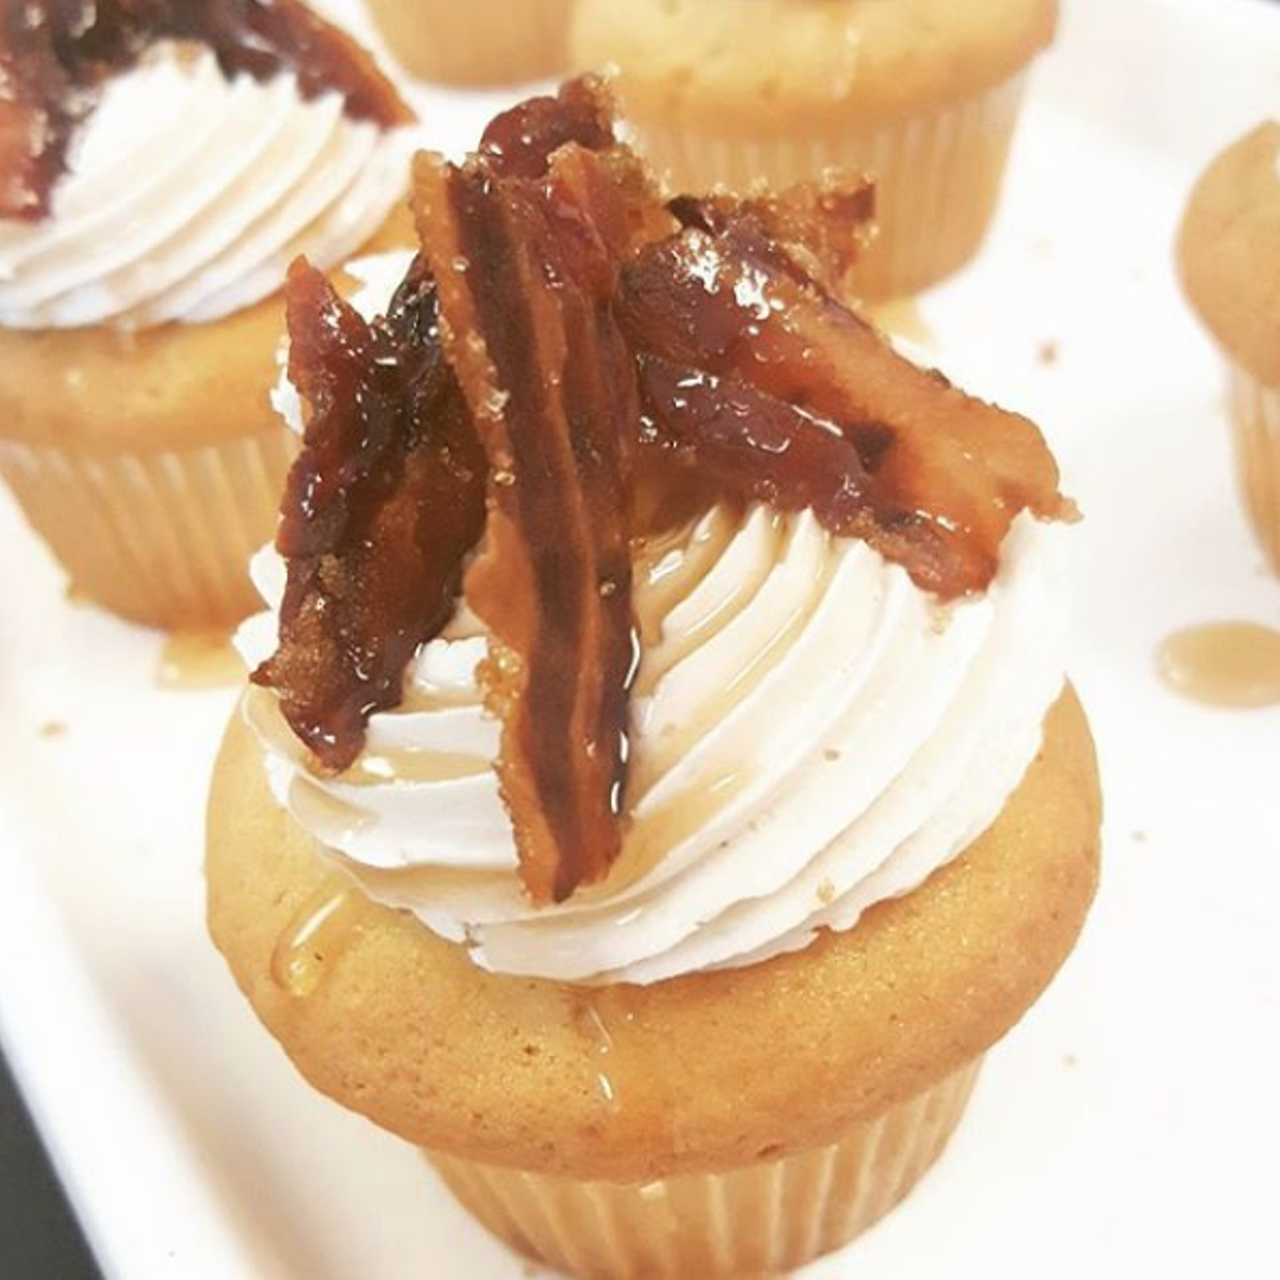 Jillycakes
125 N. Orlando Ave., Winter Park, 863-797-4233
There are over 60 flavors of cupcakes, but just 12 are made each day. If you're lucky, you&#146;ll go on a day when they make the pancake breakfast cupcake with maple bacon and sweet syrup.
Photo via jillycakesbakes/Instagram